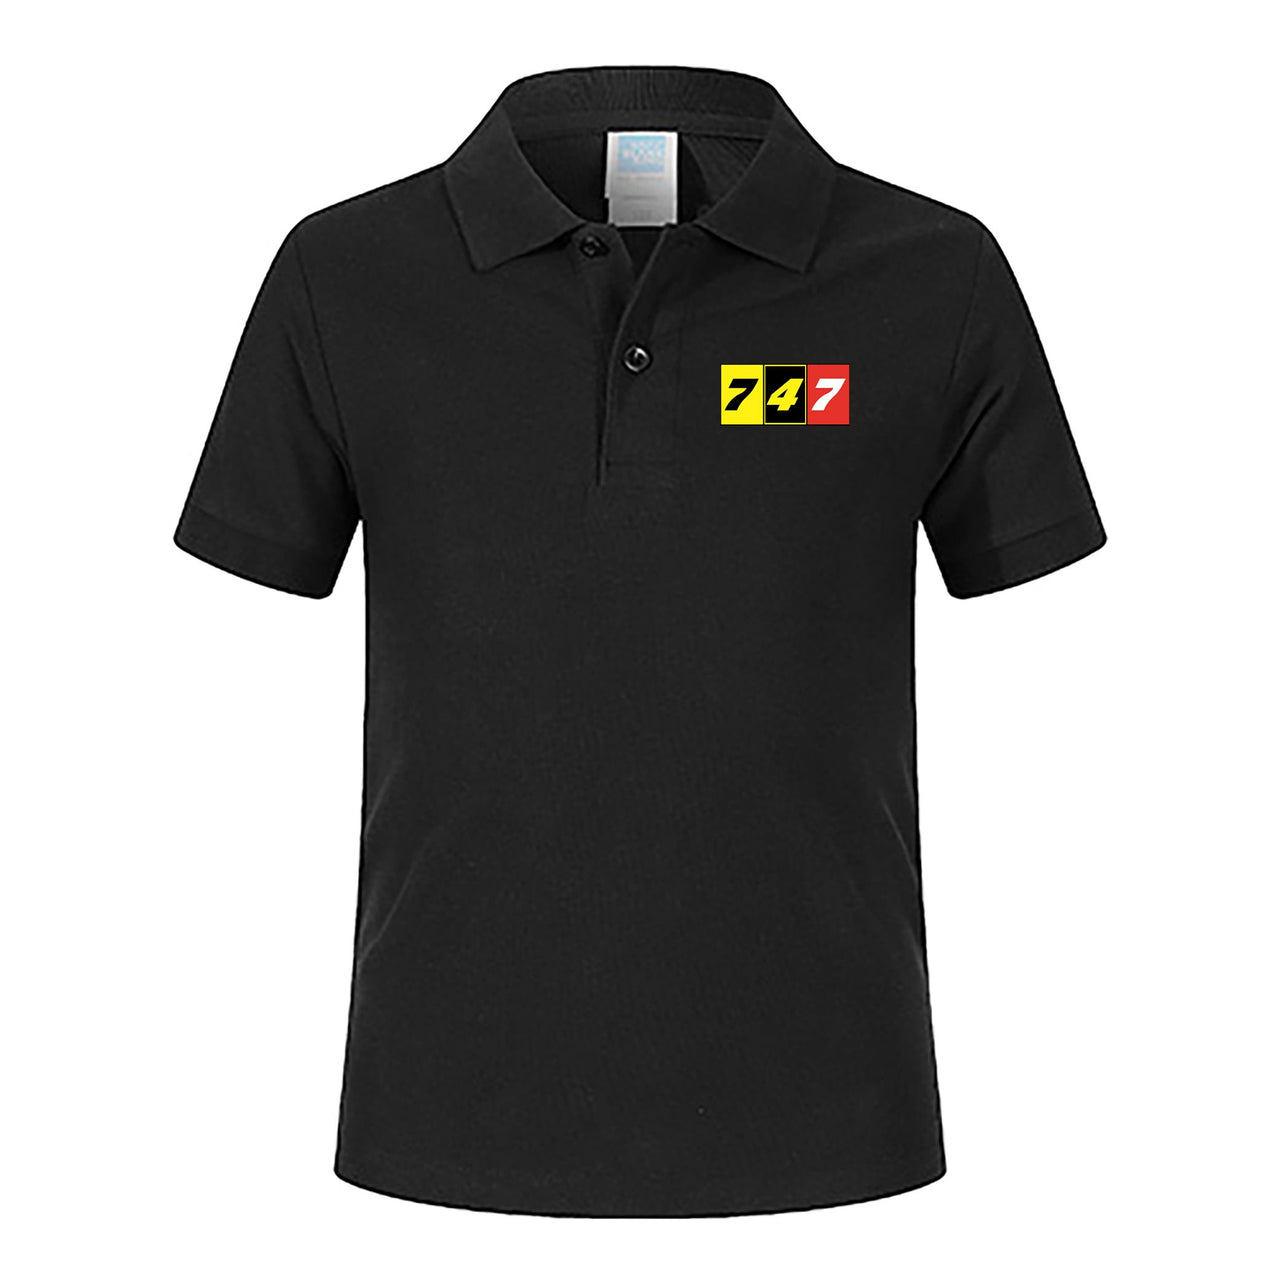 Flat Colourful 747 Designed Children Polo T-Shirts